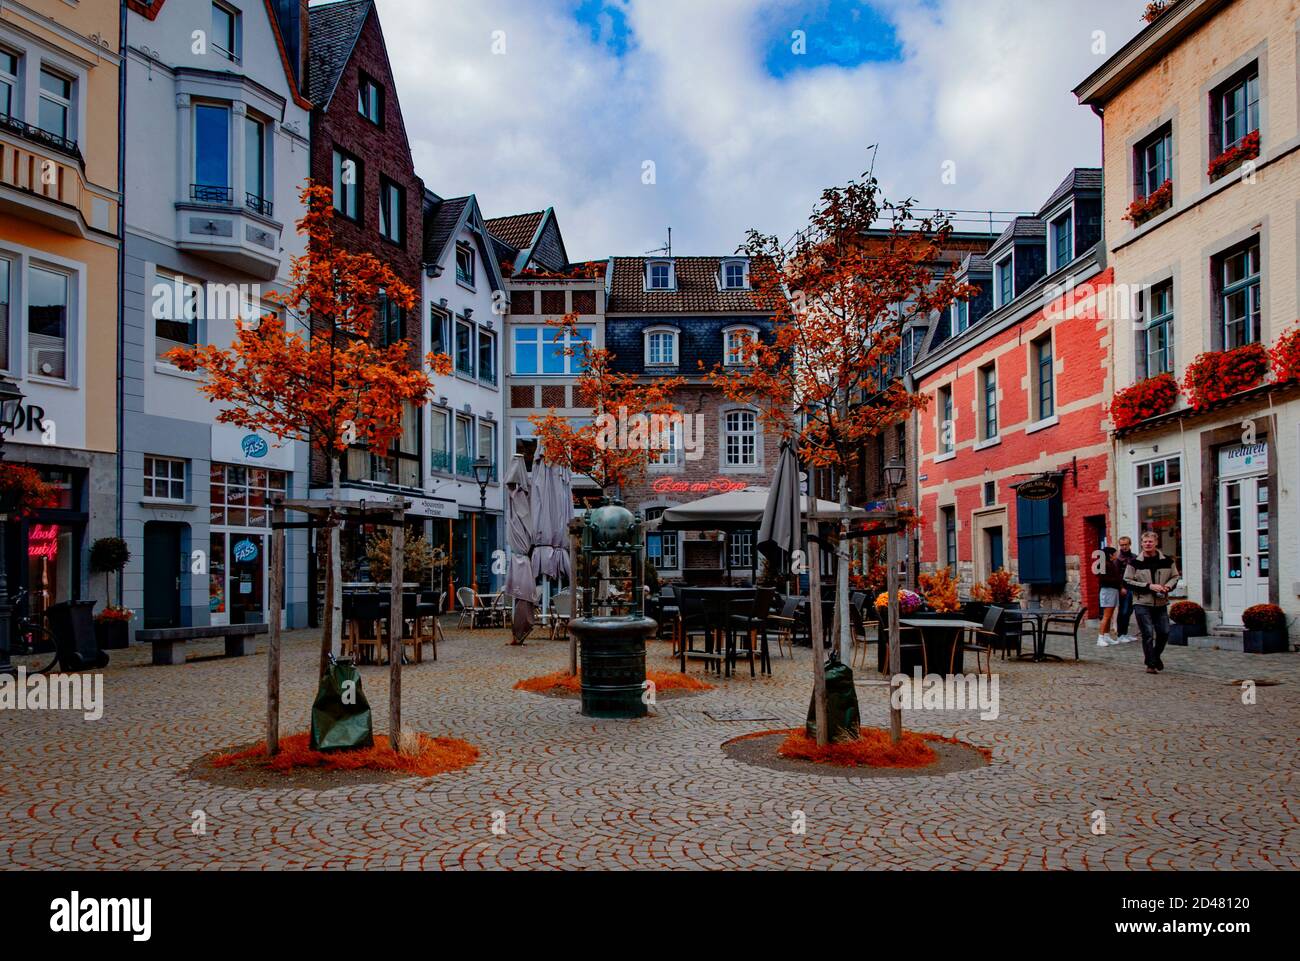 old town square in Germany, Aachen Stock Photo